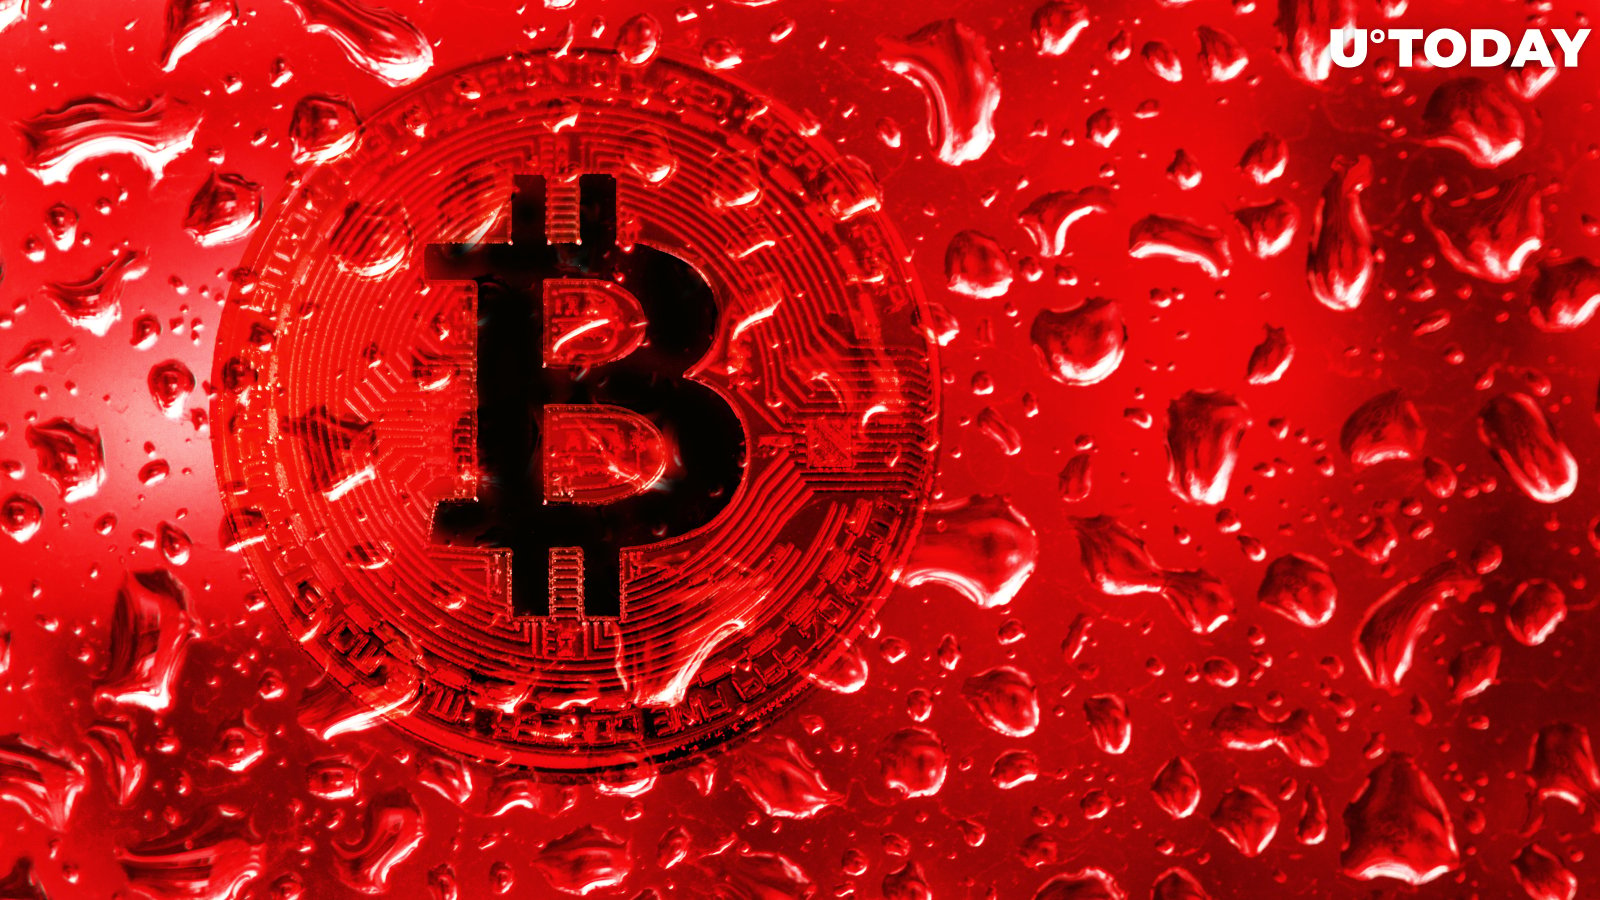 Bitcoin Bloodbath: $600 Million in Open Interest Wiped Out as BTC Price Collapses 